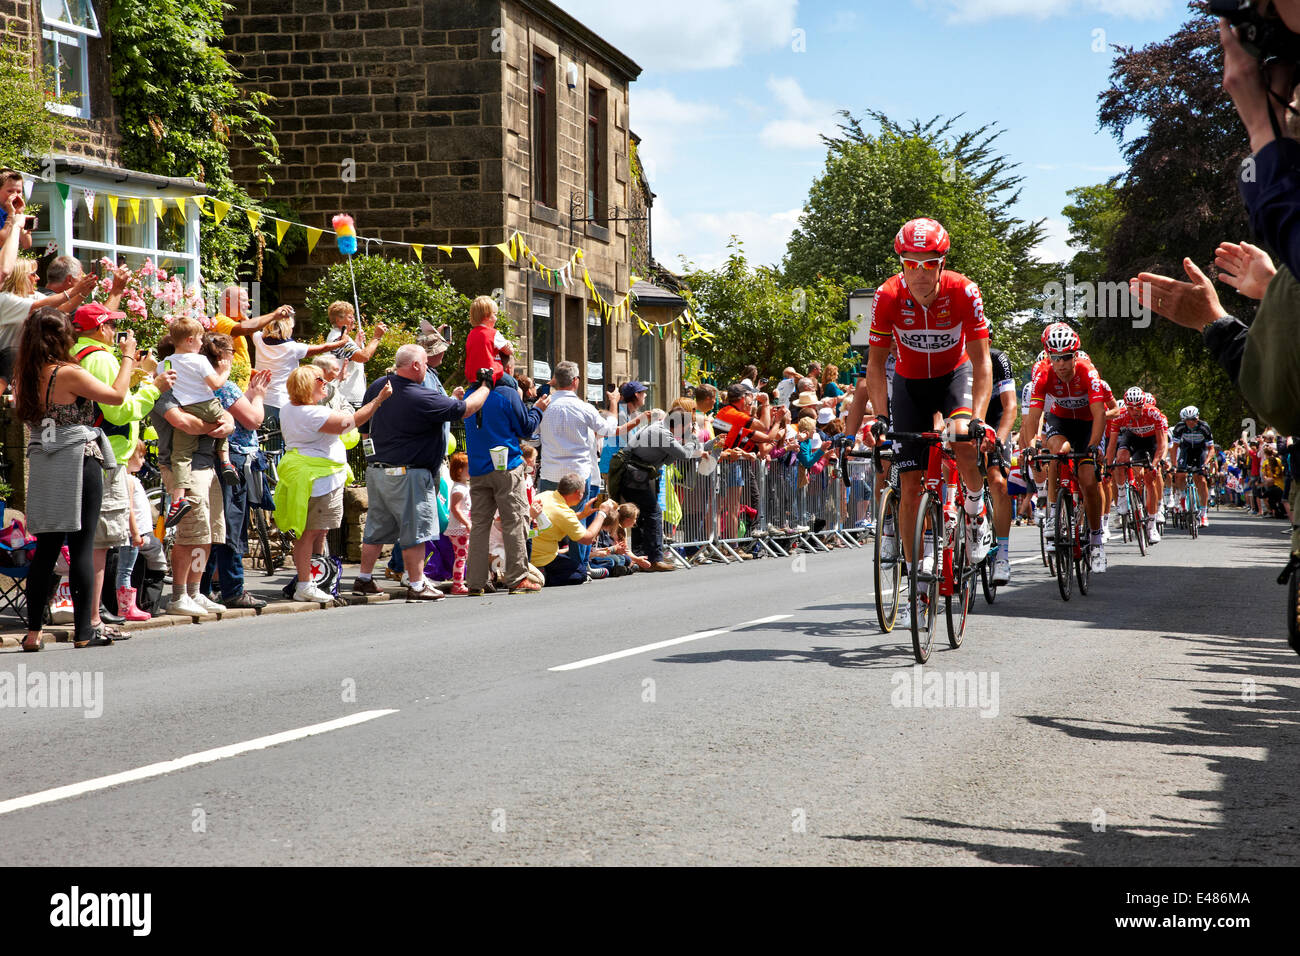 Addingham, Yorkshire. July 5th 2014. Cyclists in the First Stage of the Tour de France pass through the Yorkshire village of Addingham, with cheering crowds and sunshine. Credit:  Christina Bollen/Alamy Live News Stock Photo